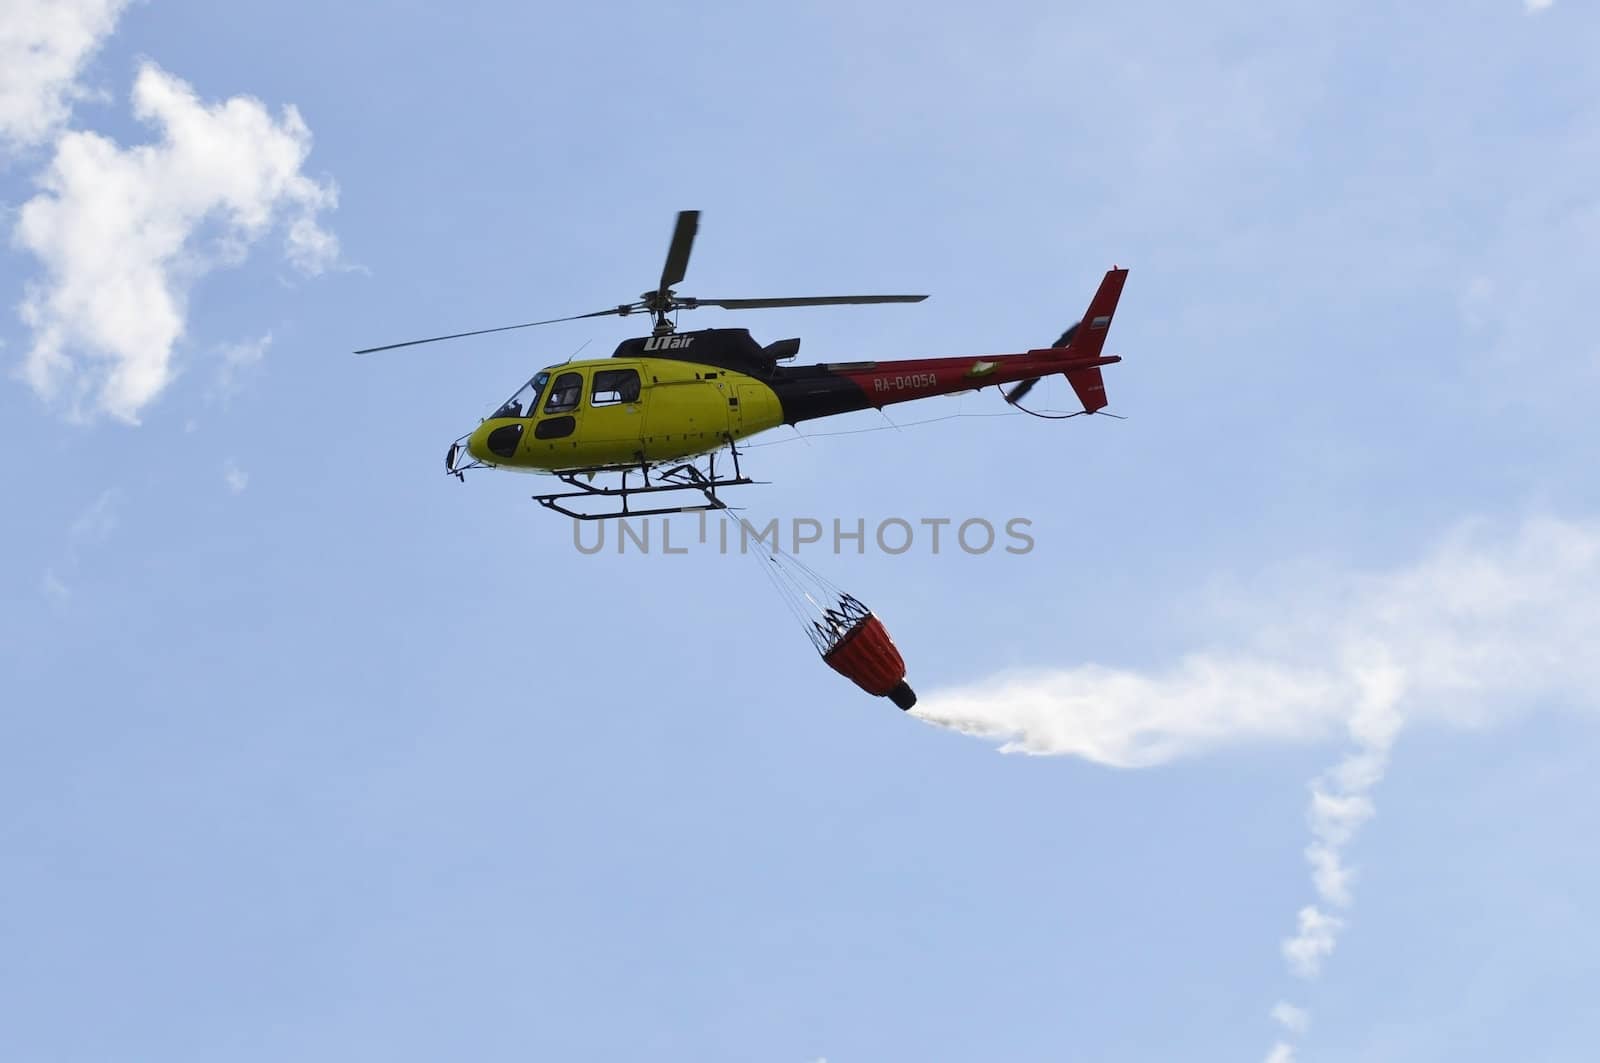 Air show "On a visit at Utair". Tyumen, Russia. 16.08.2014. The helicopter with a suspended water waste ladle